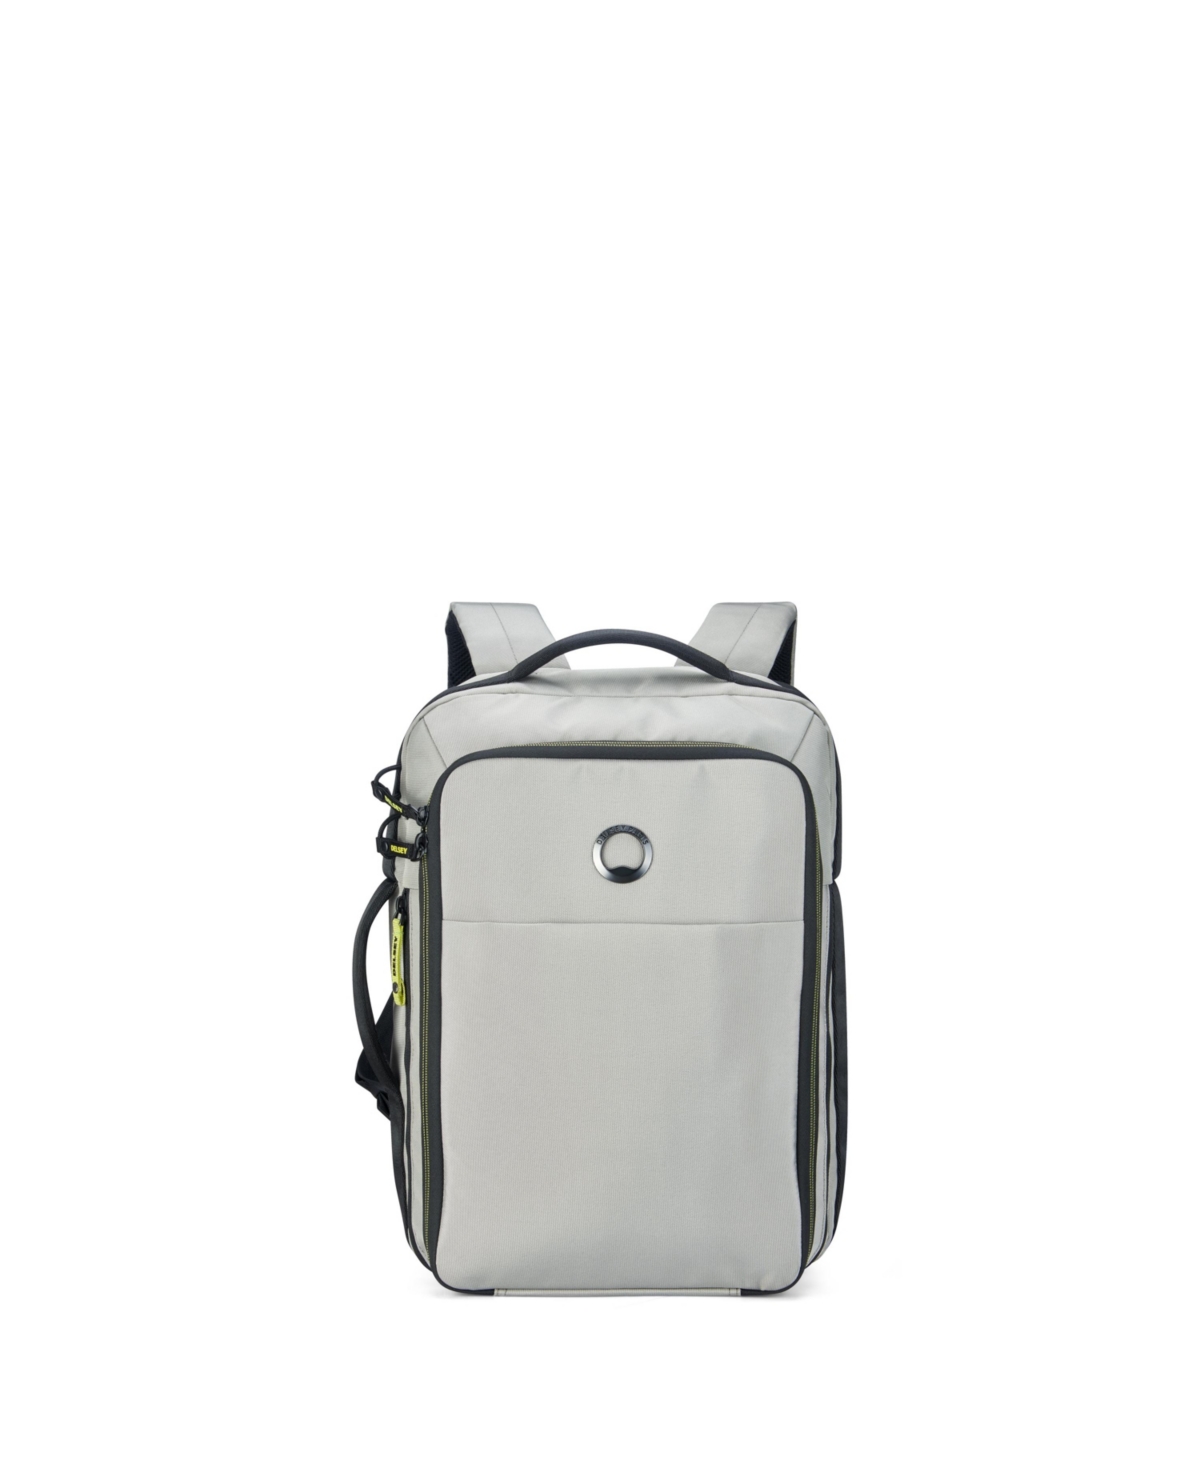 Daily's 15.6" Laptop Backpack